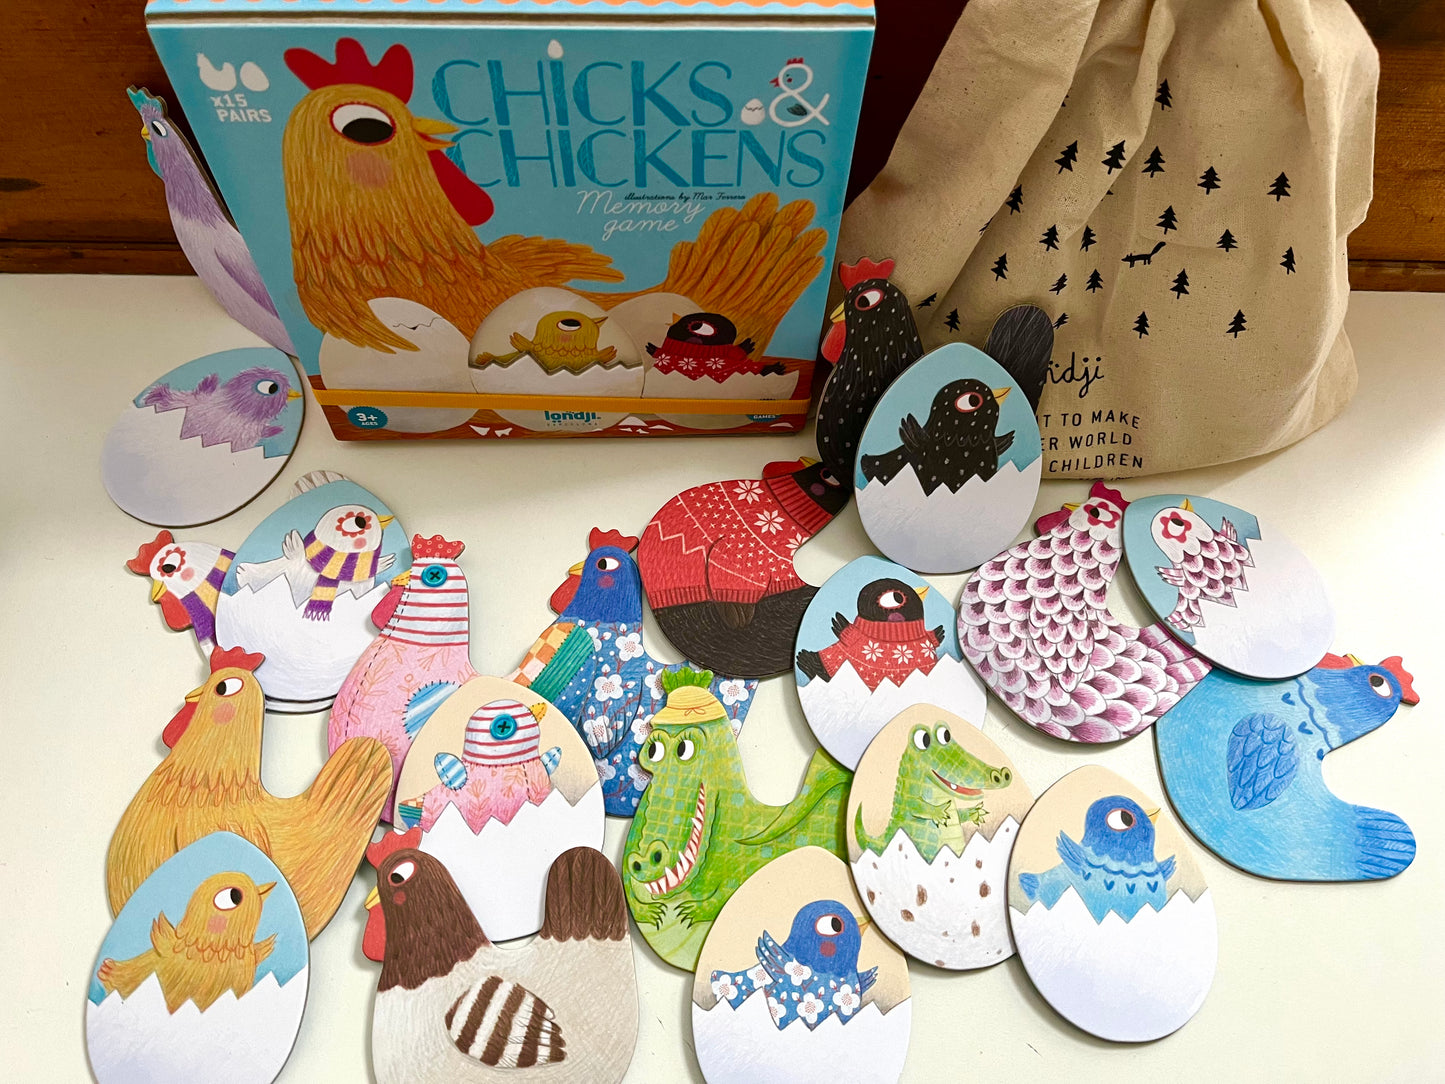 Family Memory Game - CHICKS & CHICKENS, age 3 years, 15 pairs!